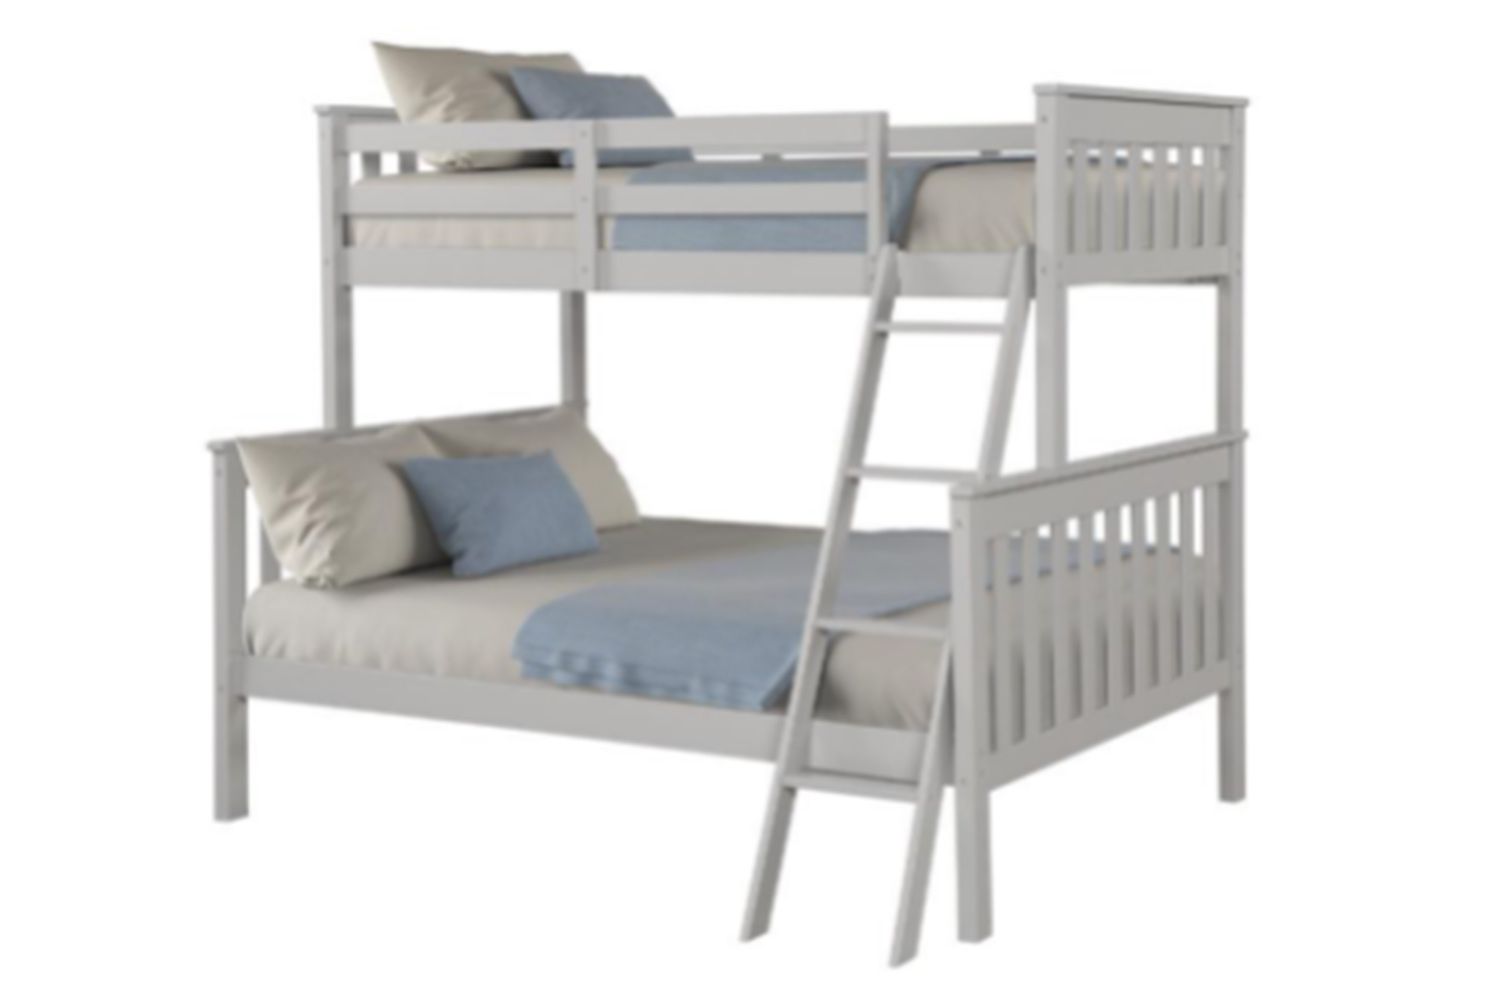 Angel Line Bunk Beds Recalled, Old Fashioned Bunk Beds